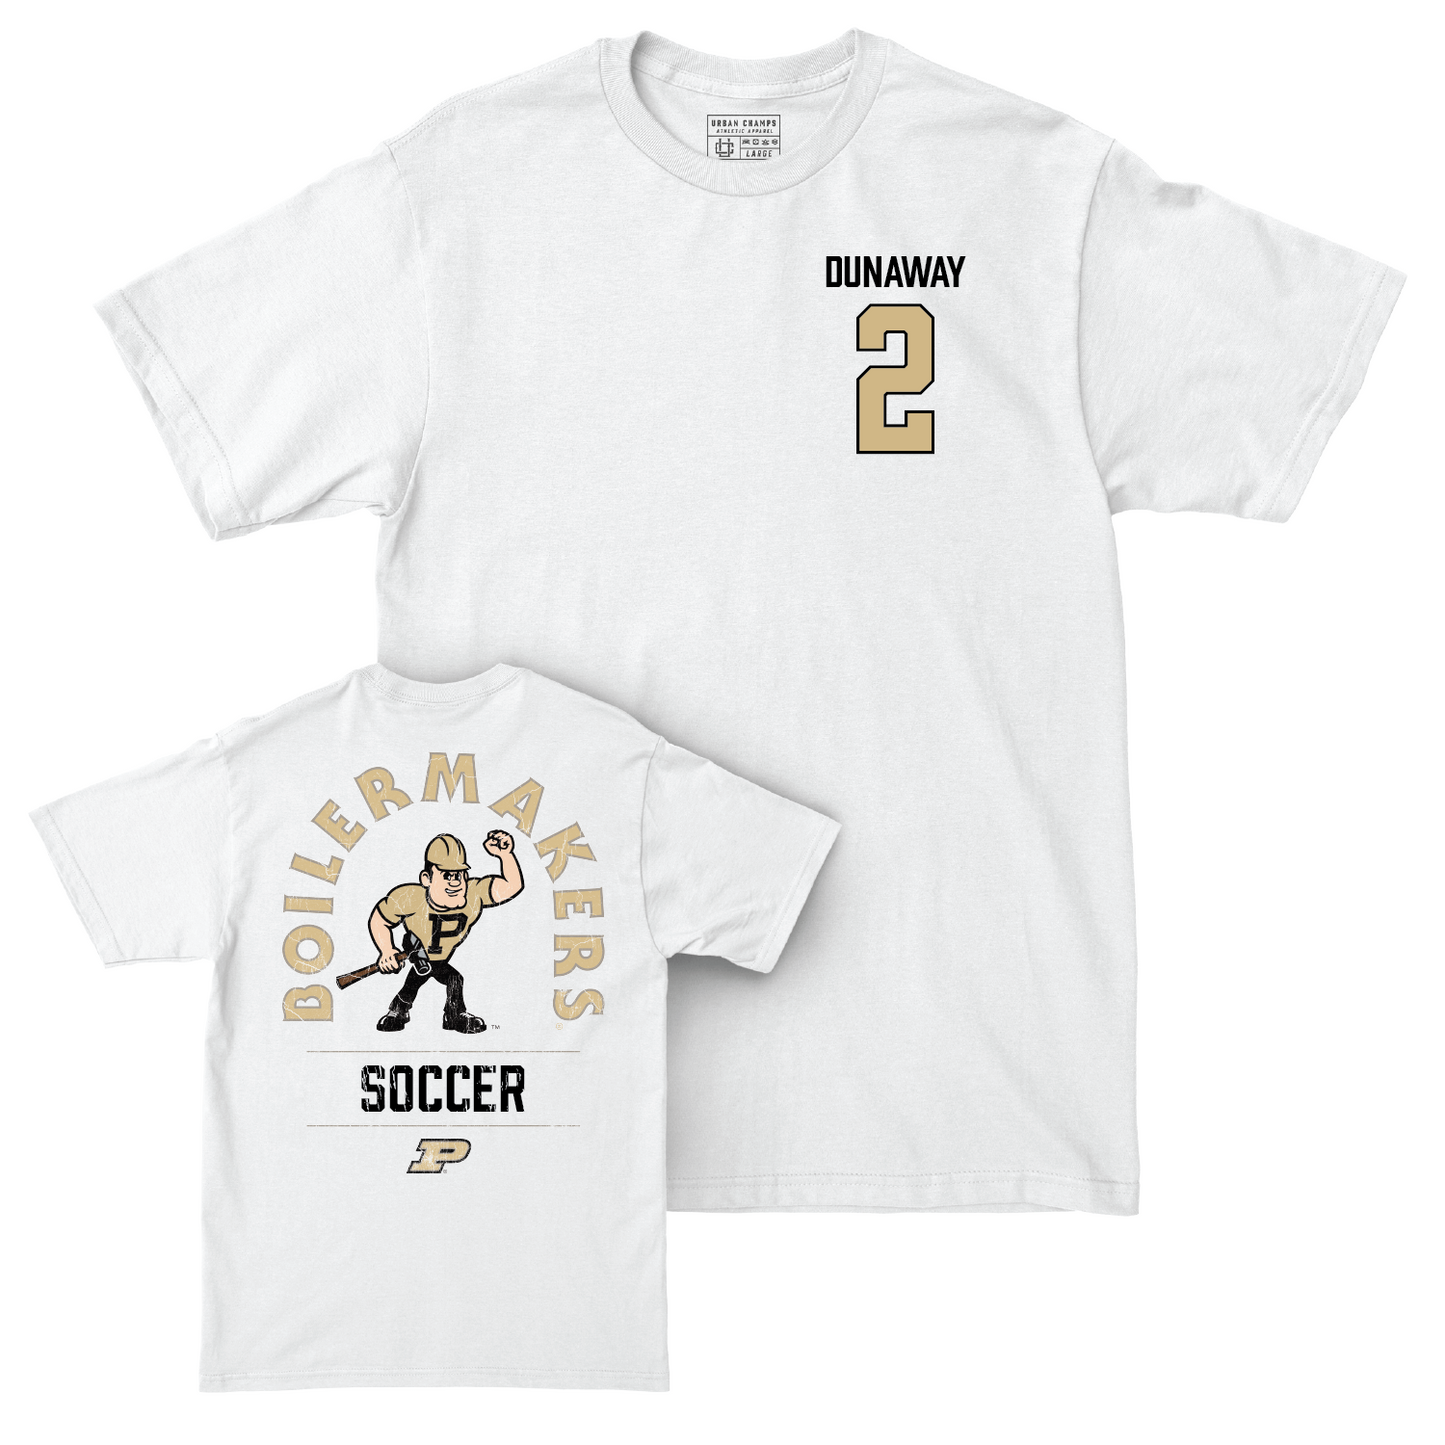 Women's Soccer White Mascot Comfort Colors Tee - Gracie Dunaway | #2 Youth Small